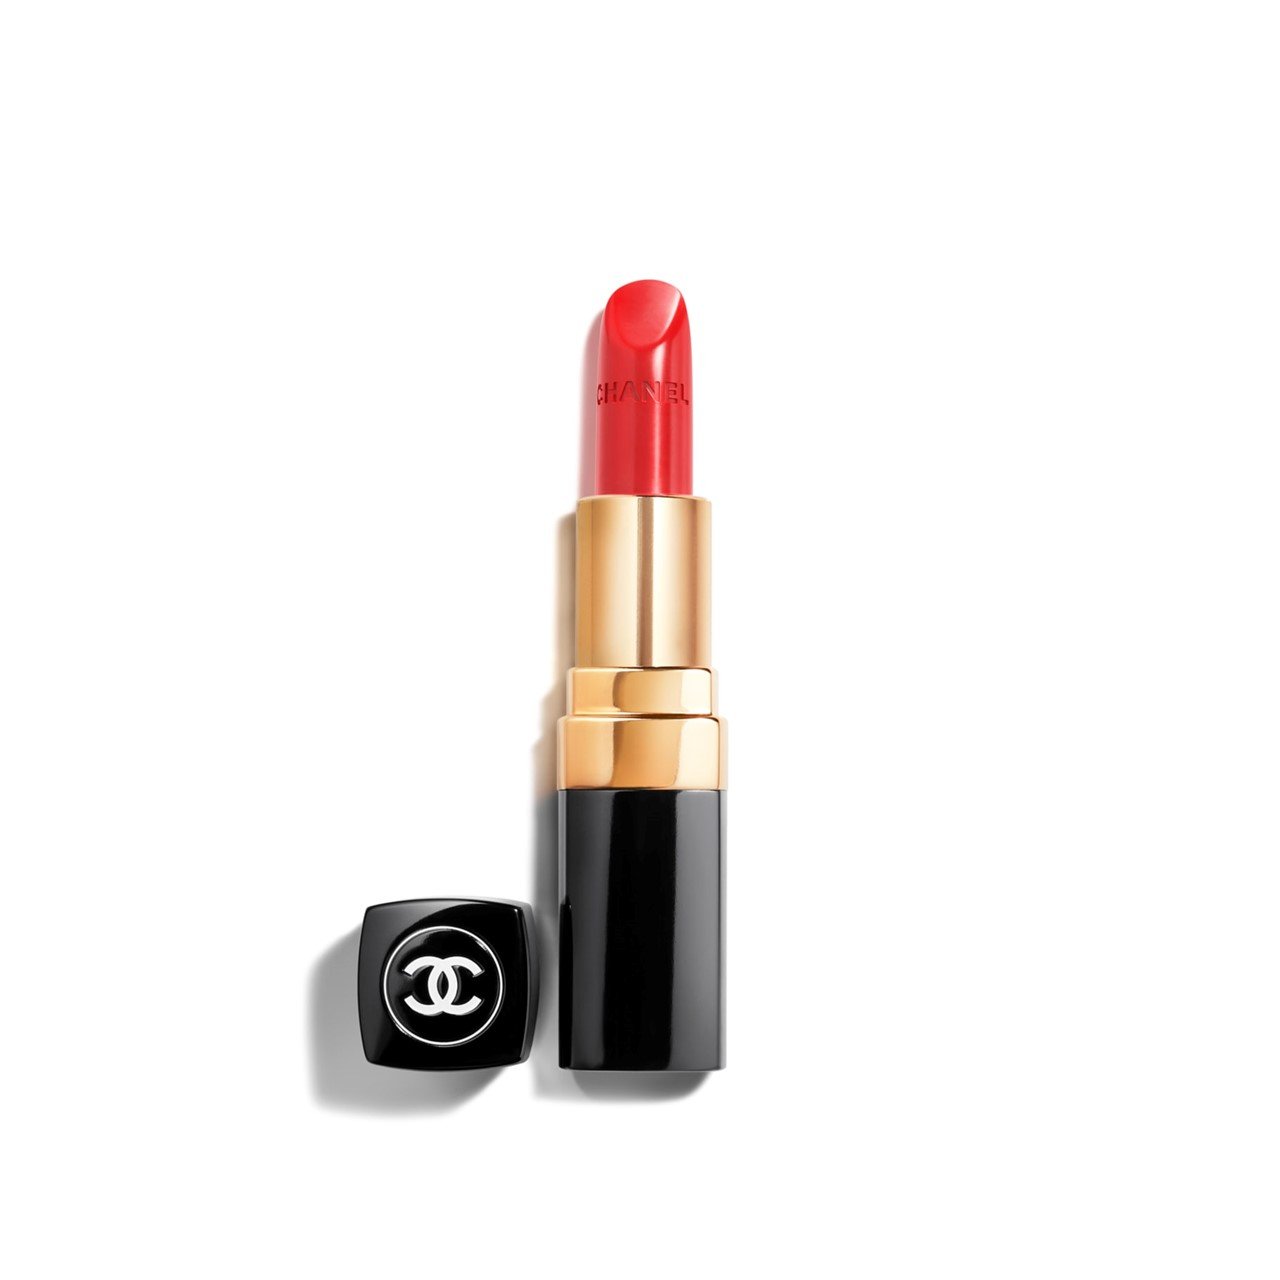 CHANEL Rouge Coco Ultra Hydrating Lip Colour 440 3.5g (0.12oz)